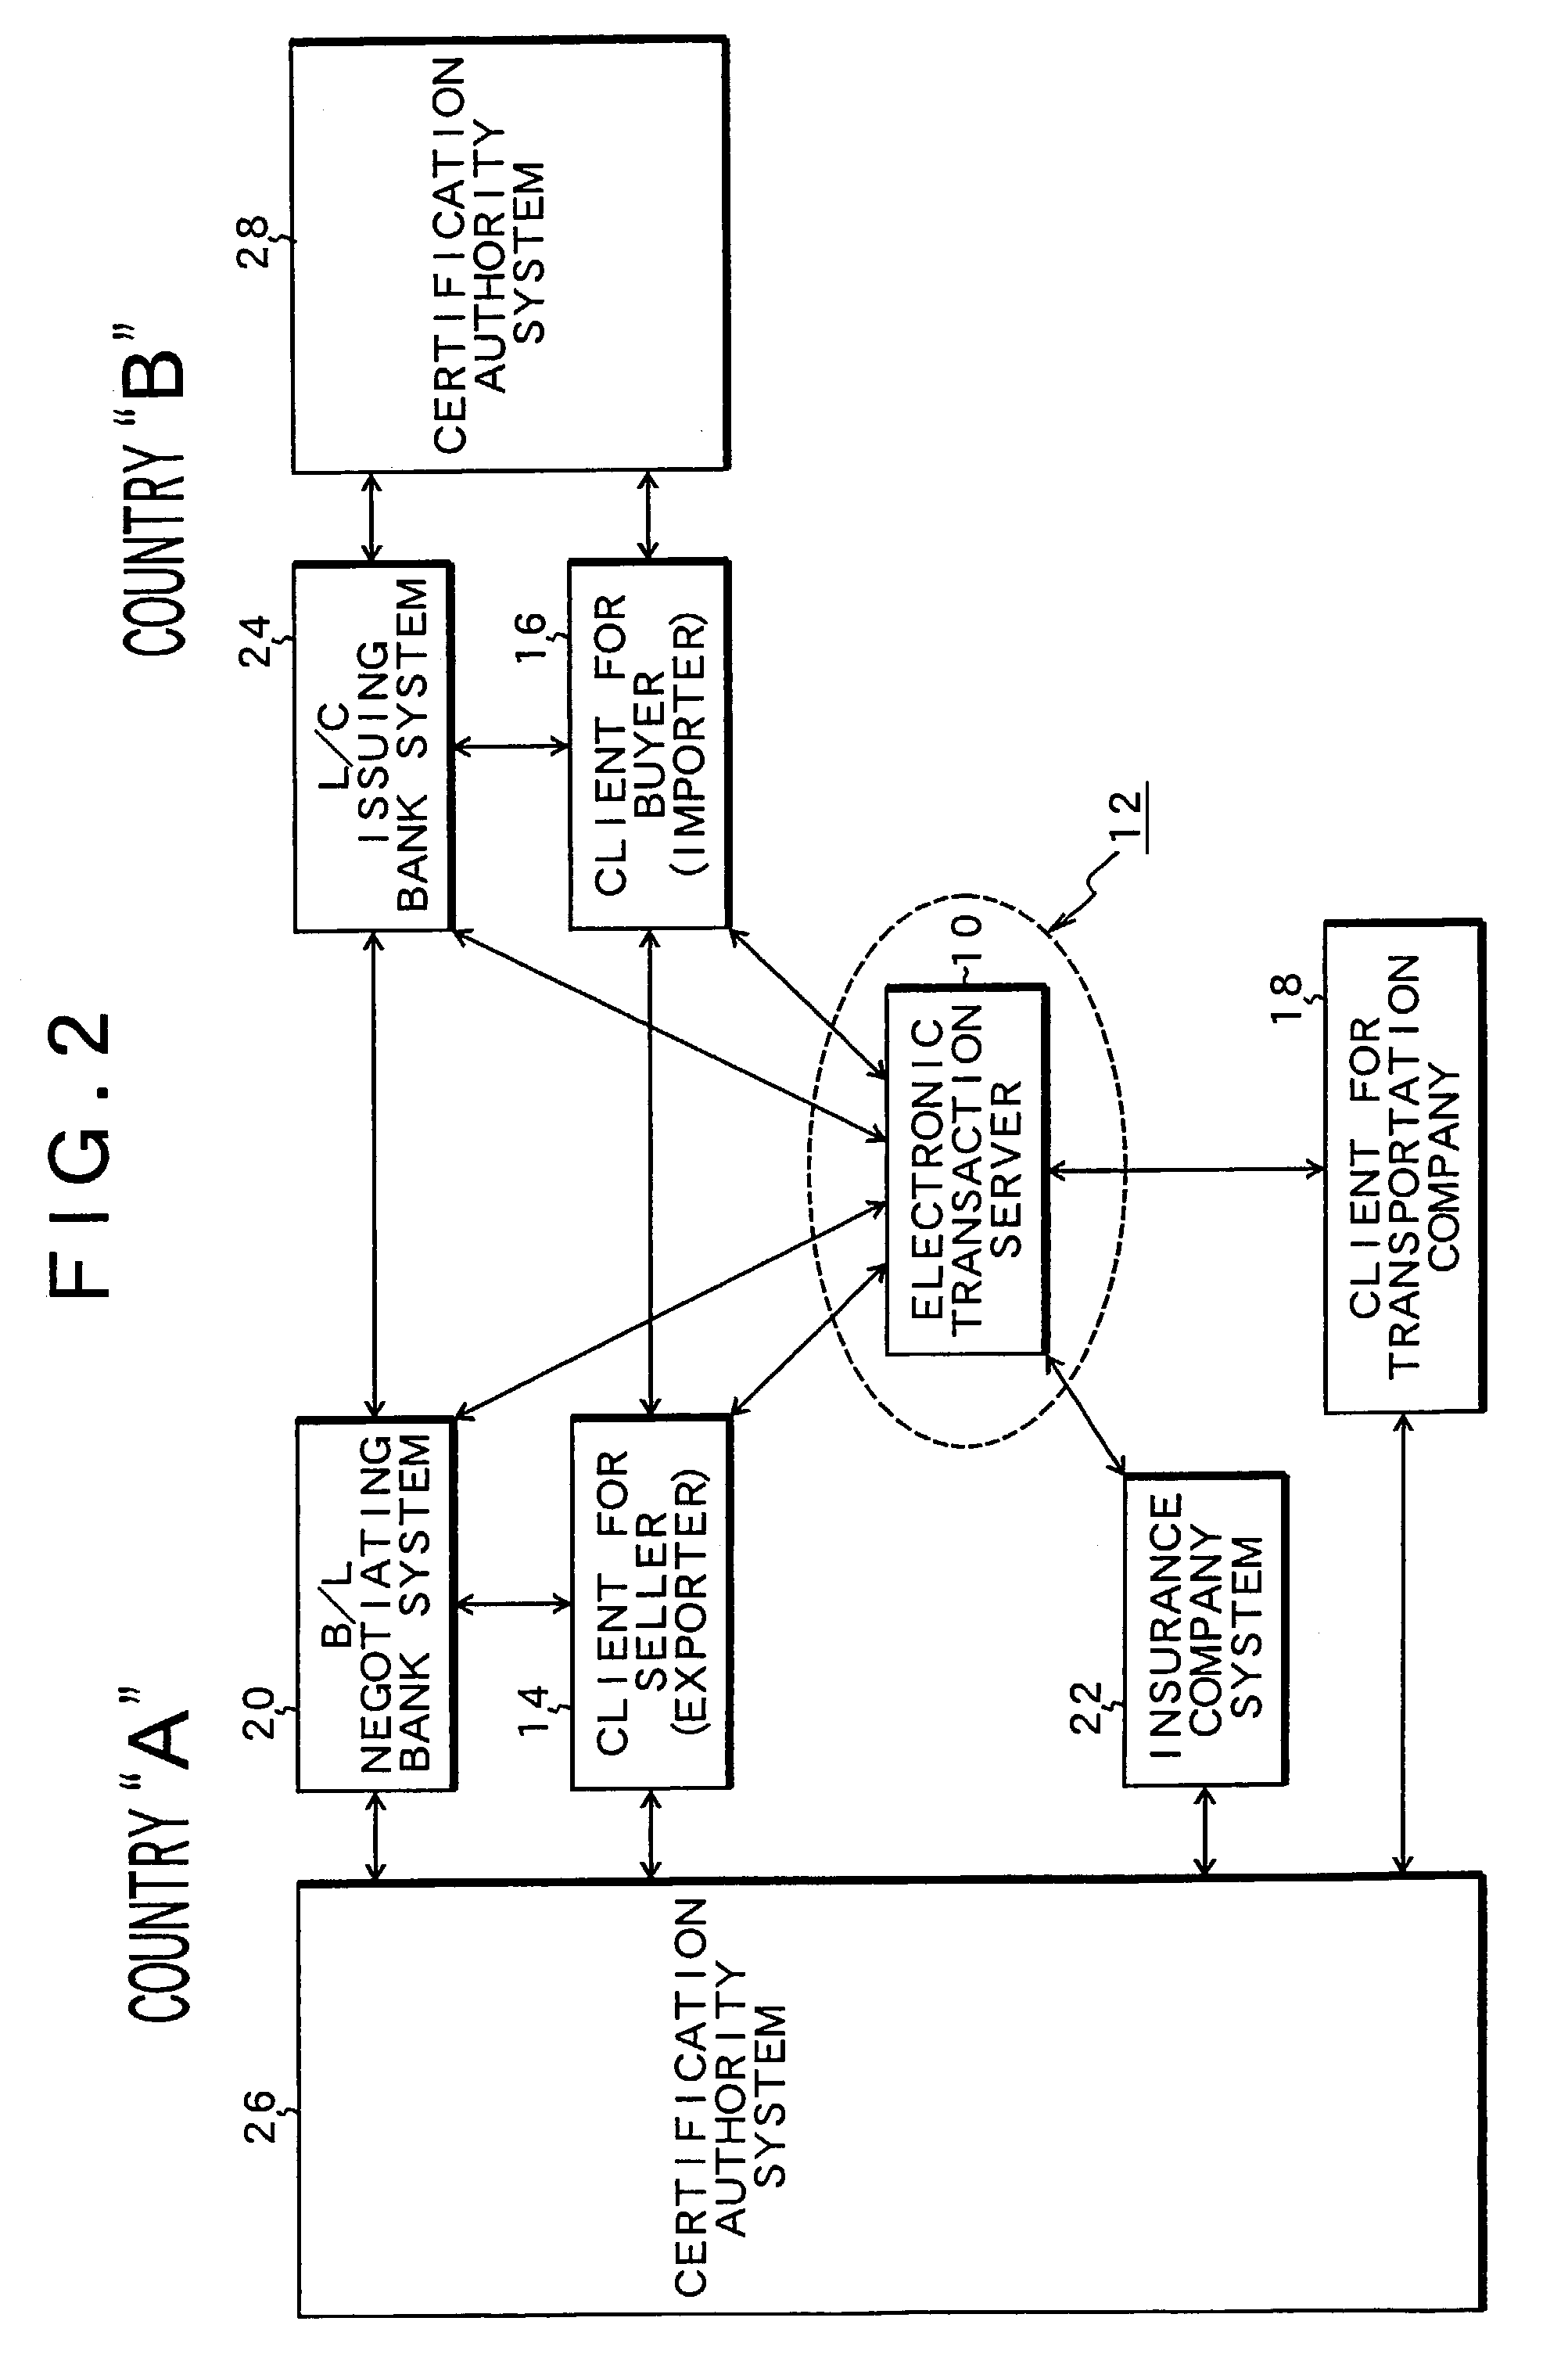 Electronic transaction server, client for seller, client for buyer and electronic transaction method